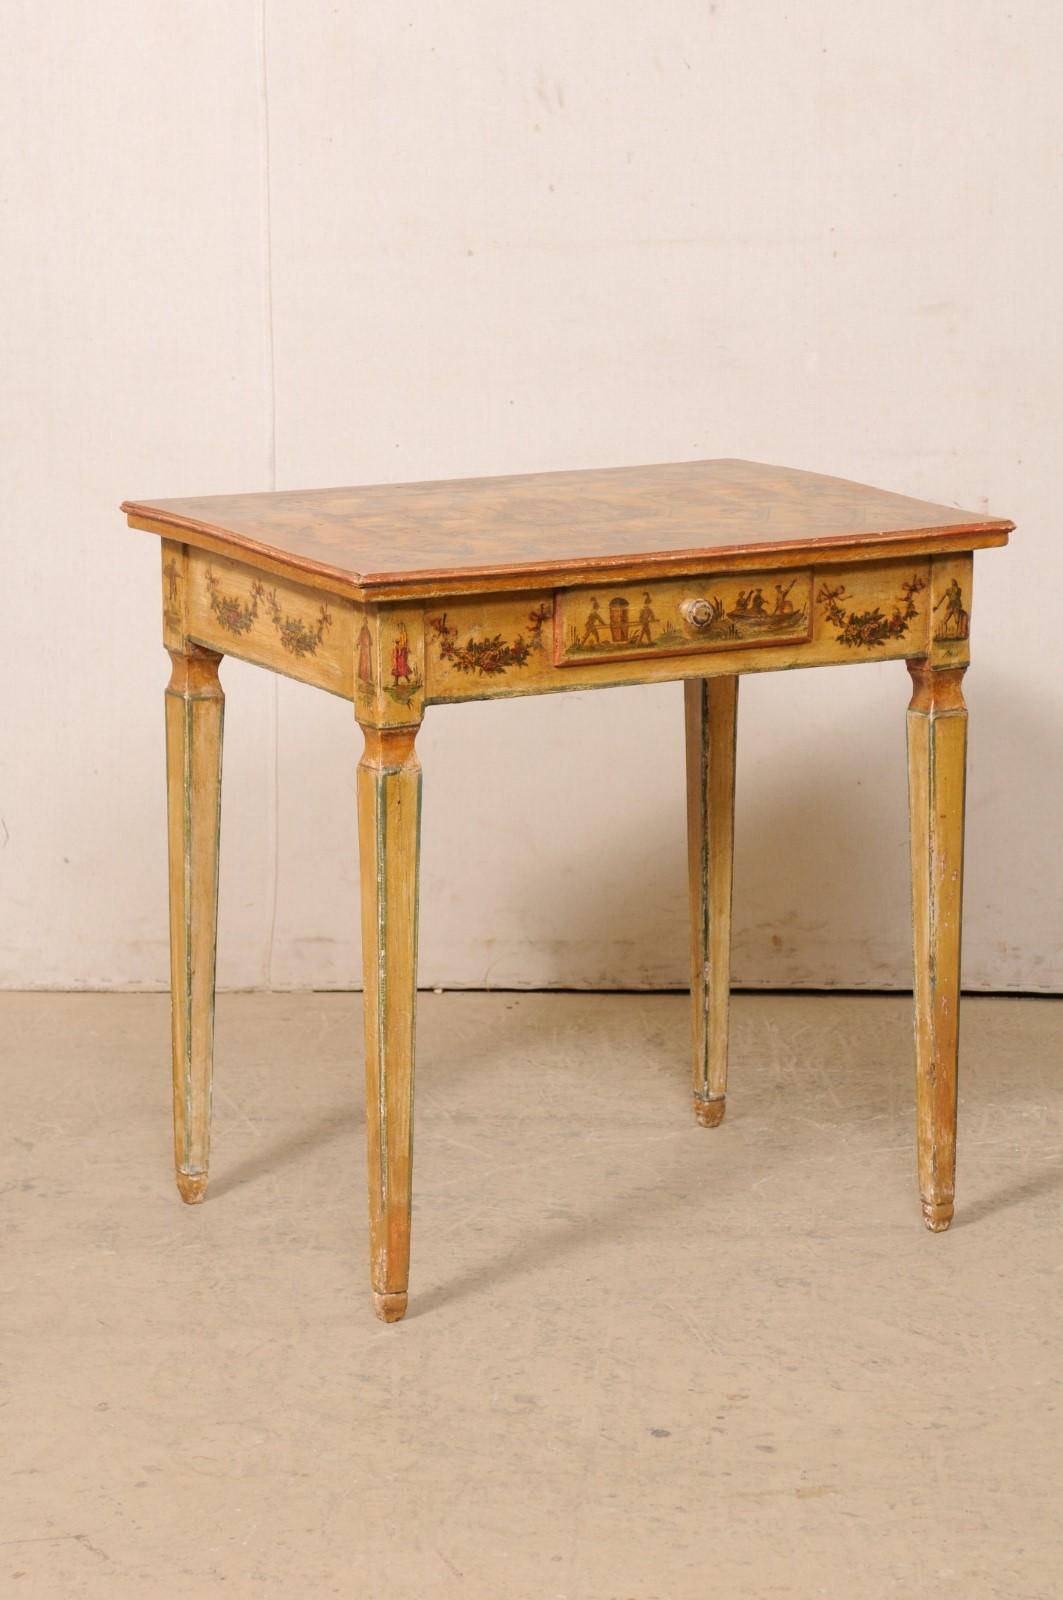 An Italian occasional table with its original laca povera finish from the 18th century. This antique table from Italy retains its original 